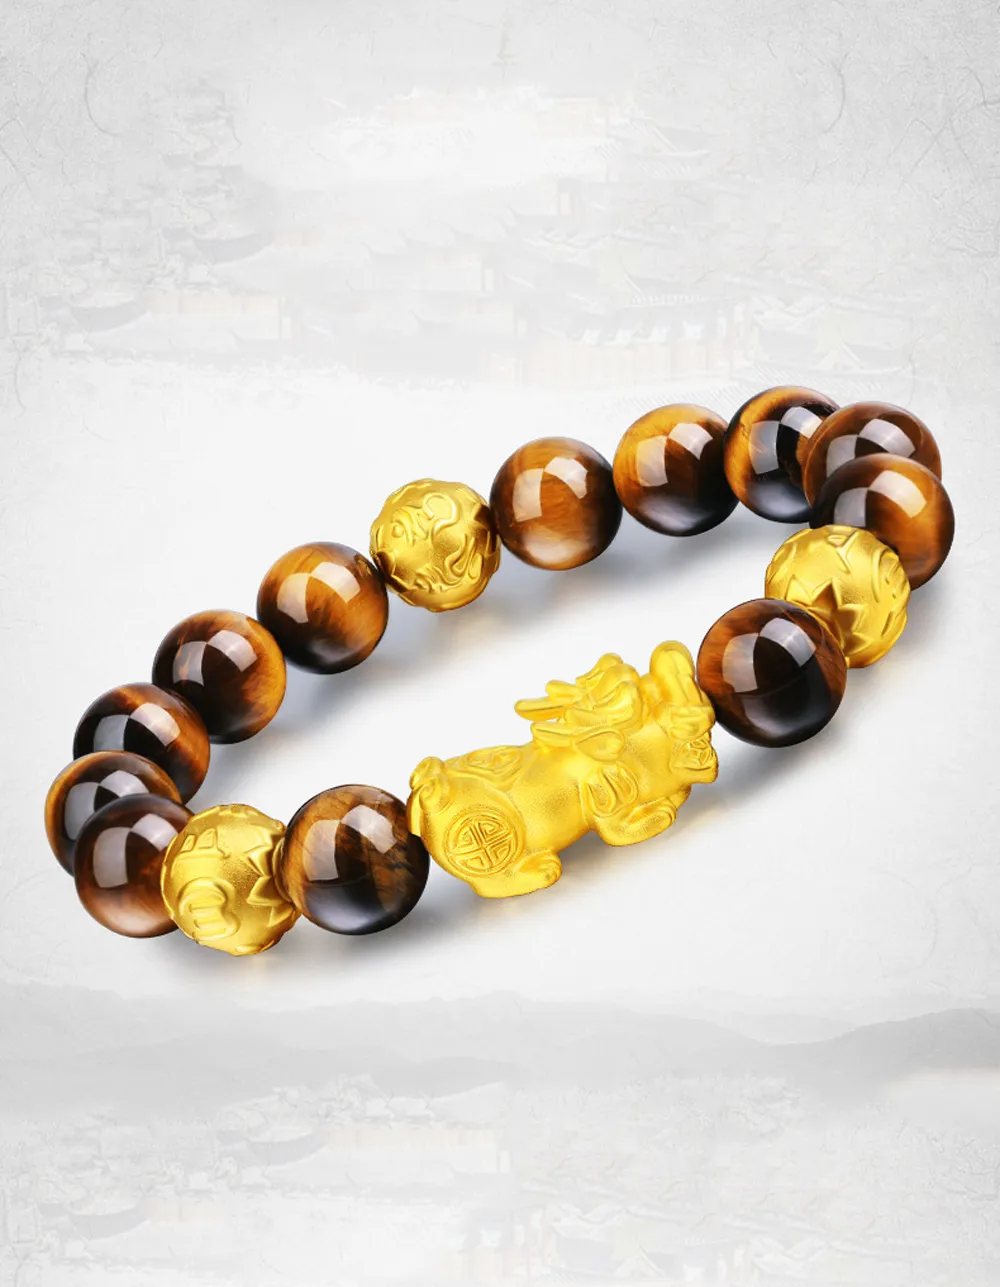 Today's natural stone bracelet ♡ | Gallery posted by RMC* | Lemon8